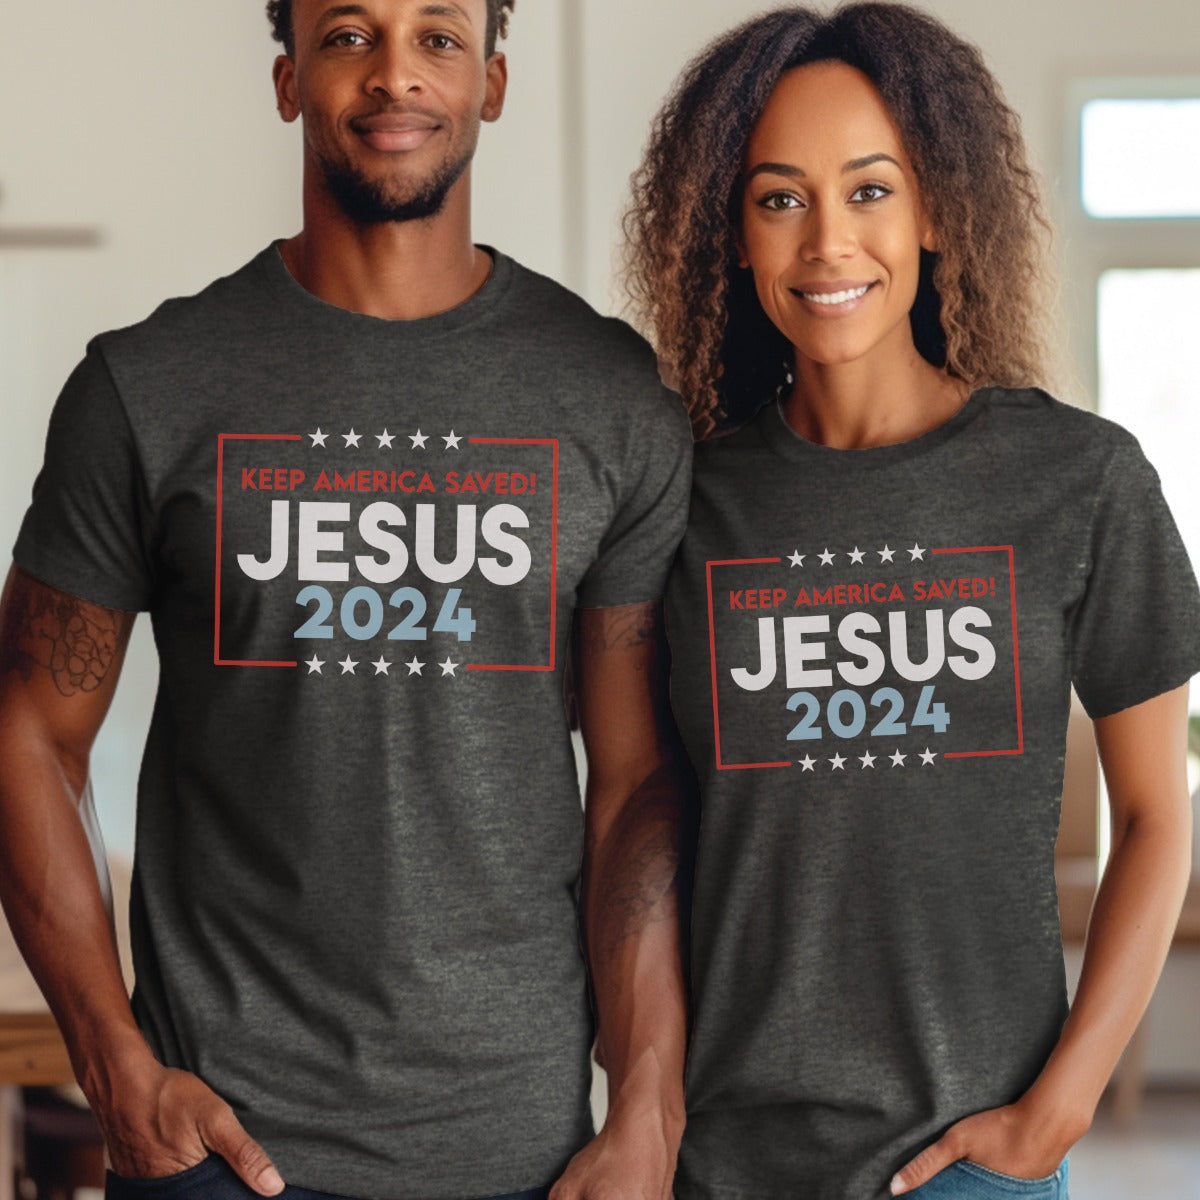 Patriotic couple wearing a heather dark gray stars and stripes Presidential election vote unisex Christian t-shirts that say "Jesus 2024 Keep America Saved" in bold red, white, and blue fonts, made in the USA for men and women God & Country Patriots